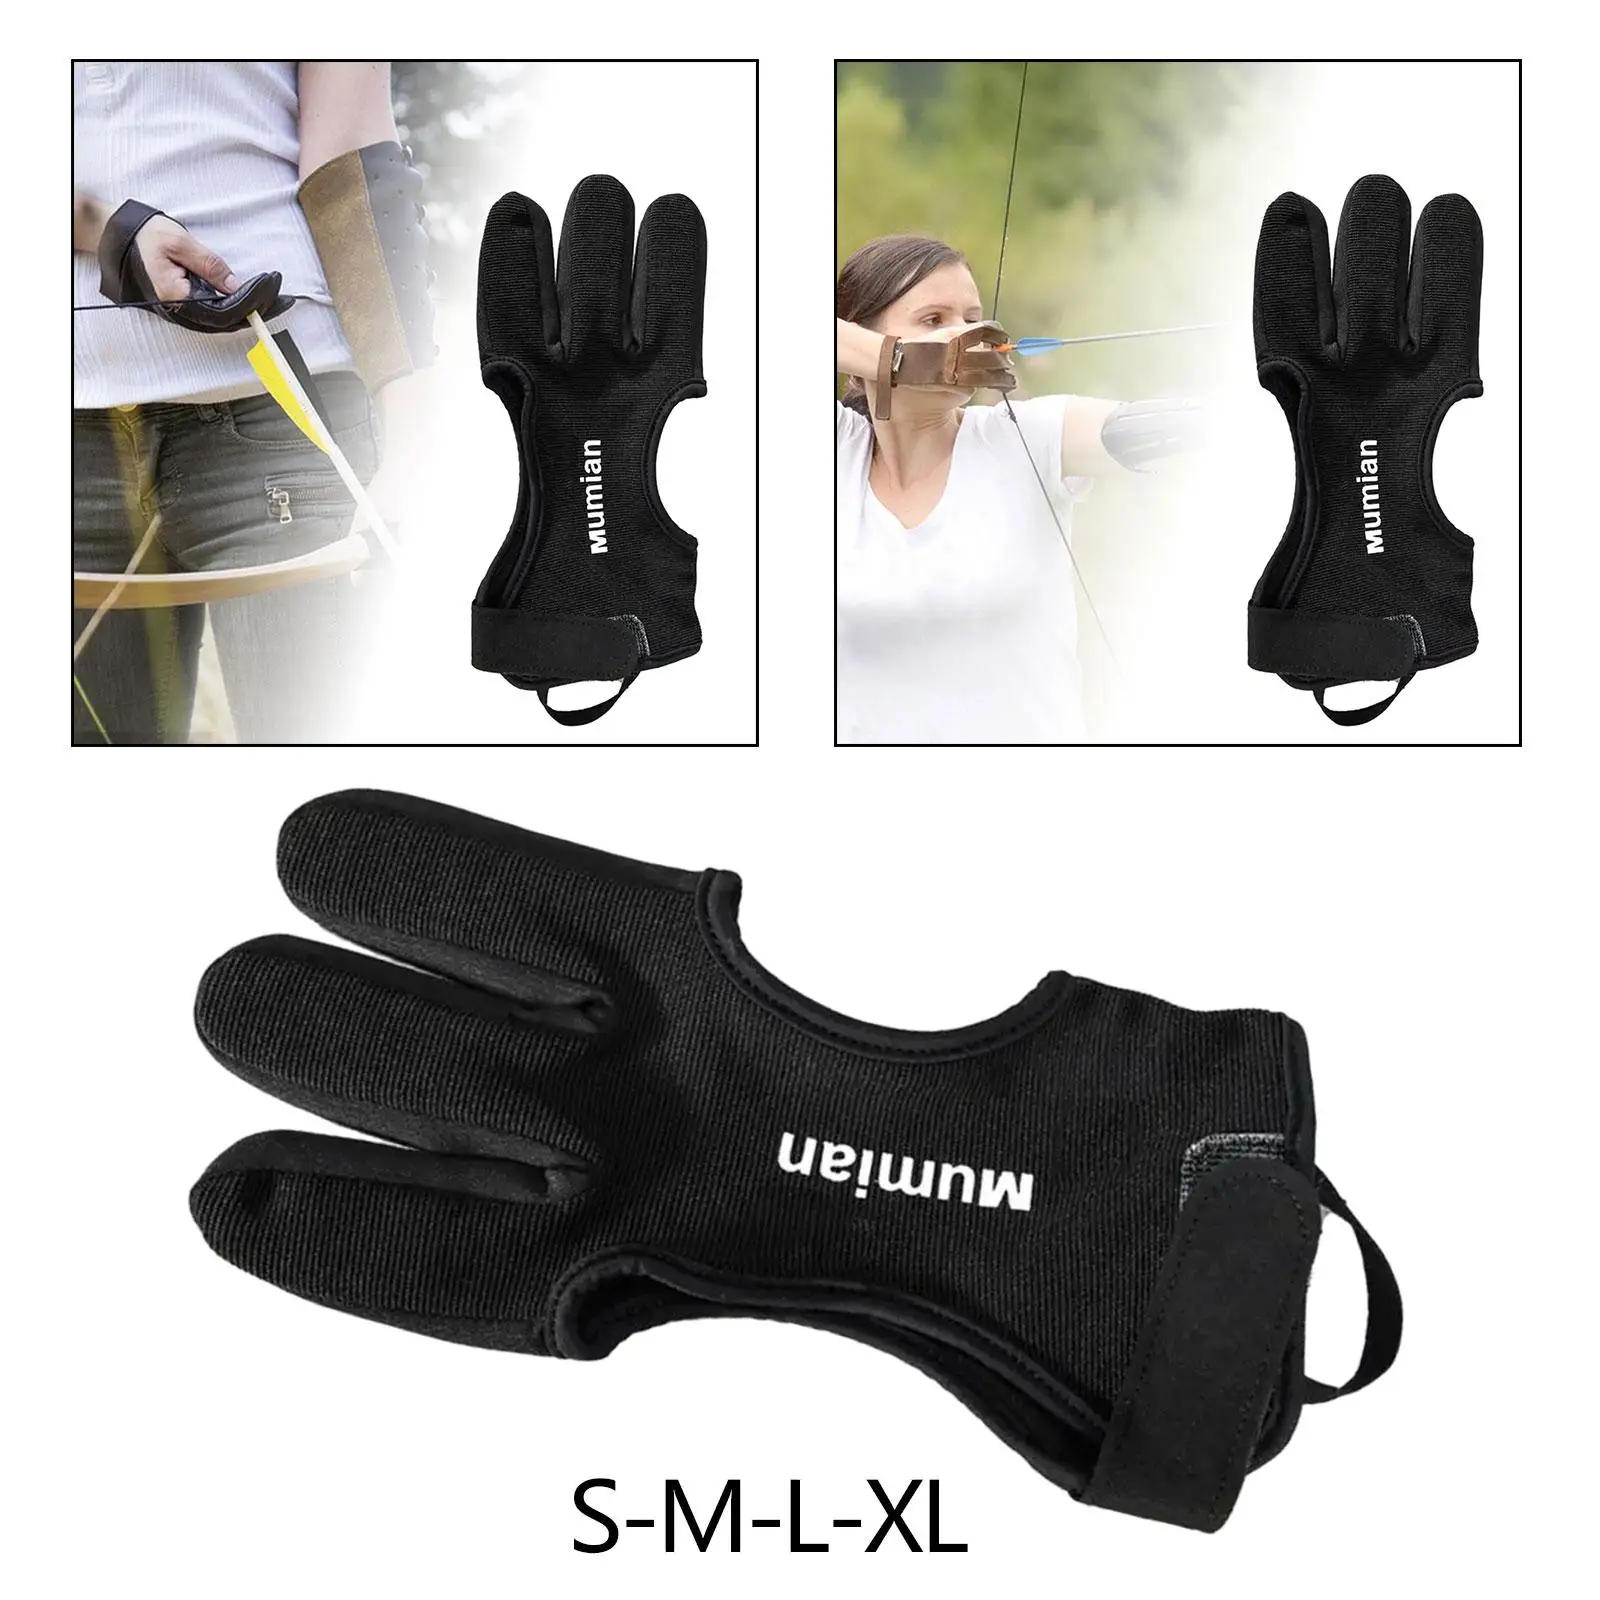 Archery Glove Three for Left and Right Hand Finger Protector Archery Finger Guard for Men Women Archery Training